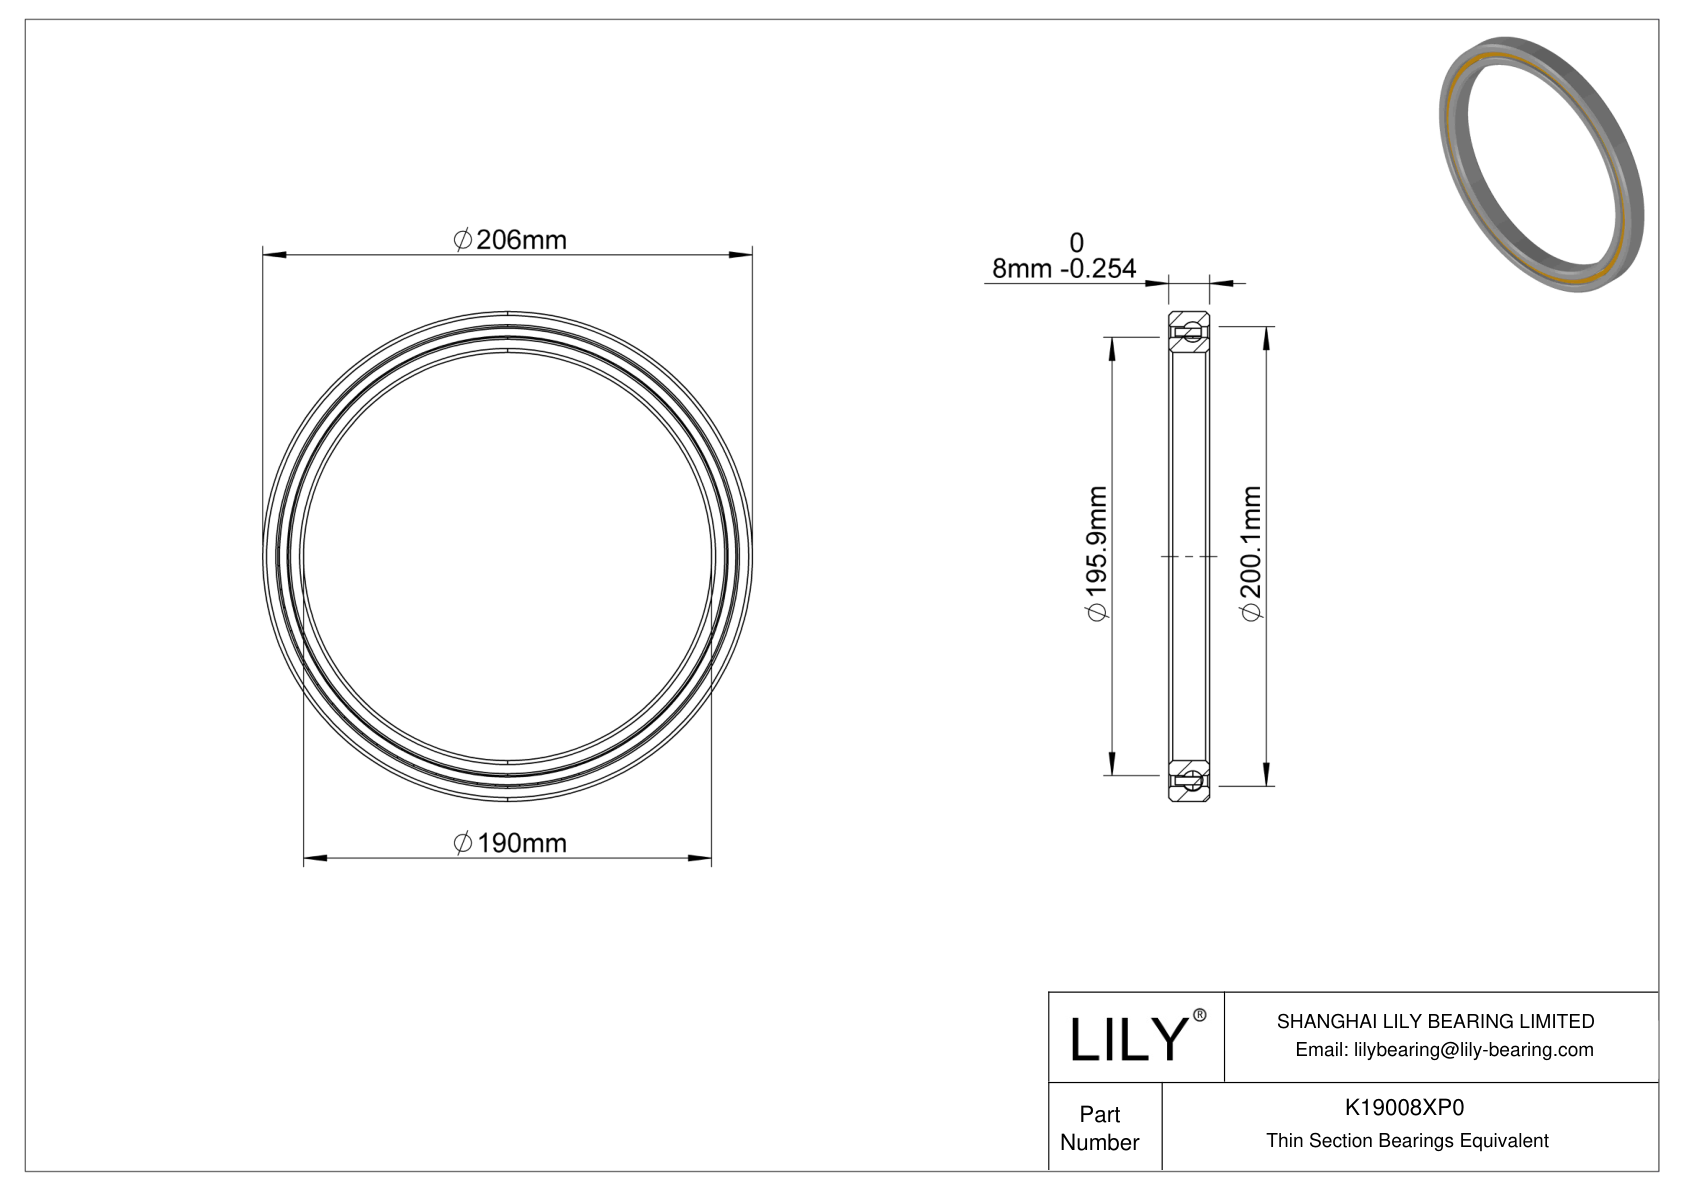 K19008XP0 Constant Section (CS) Bearings cad drawing